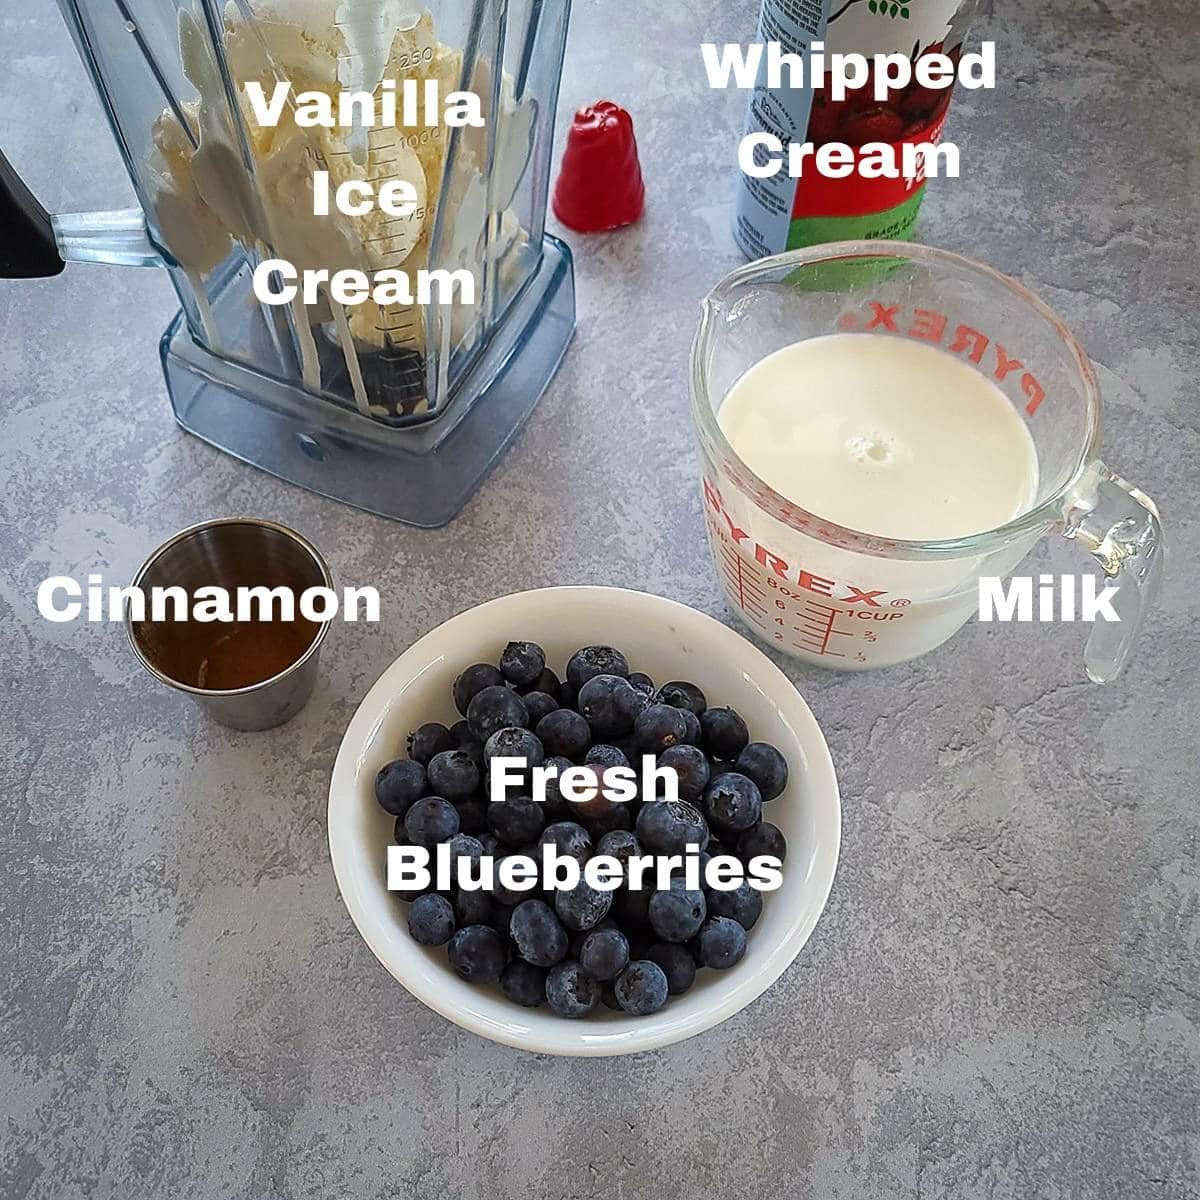 labeled ingredients shown for a blueberry milkshake